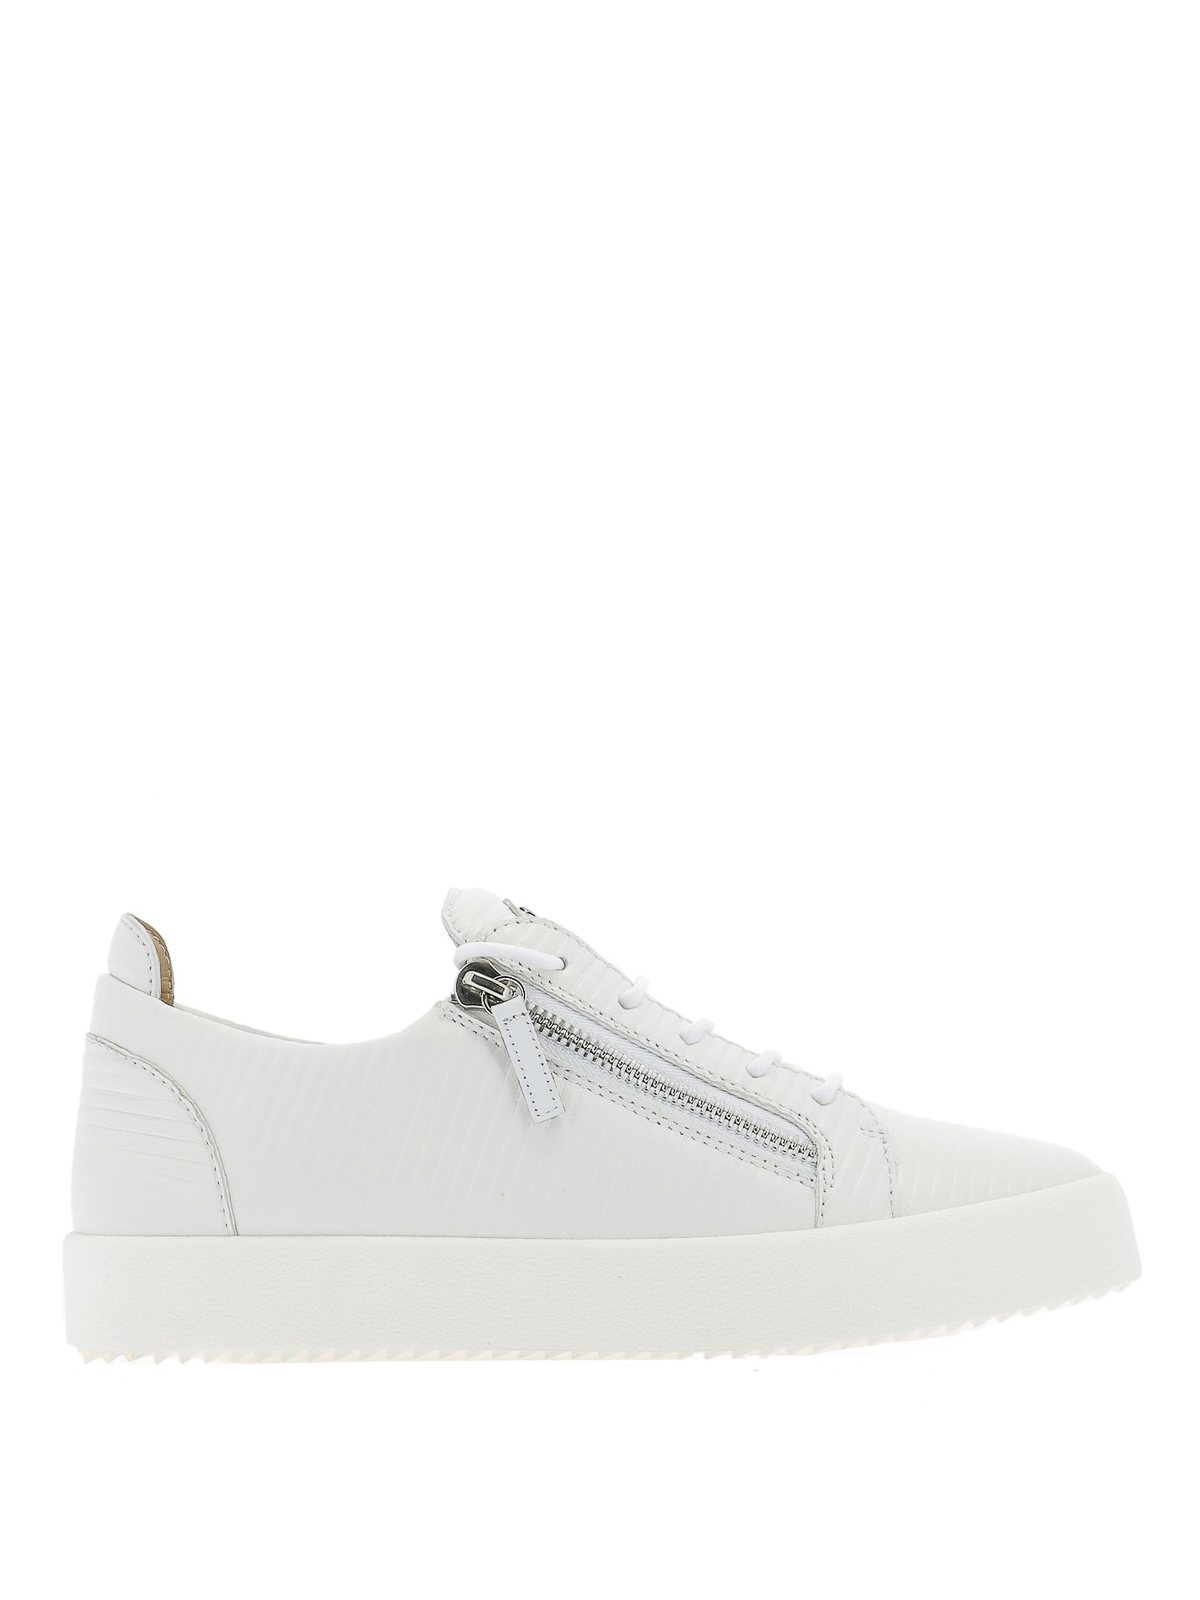 Trainers Giuseppe Zanotti - Frankie textured leather sneakers - RM90084001